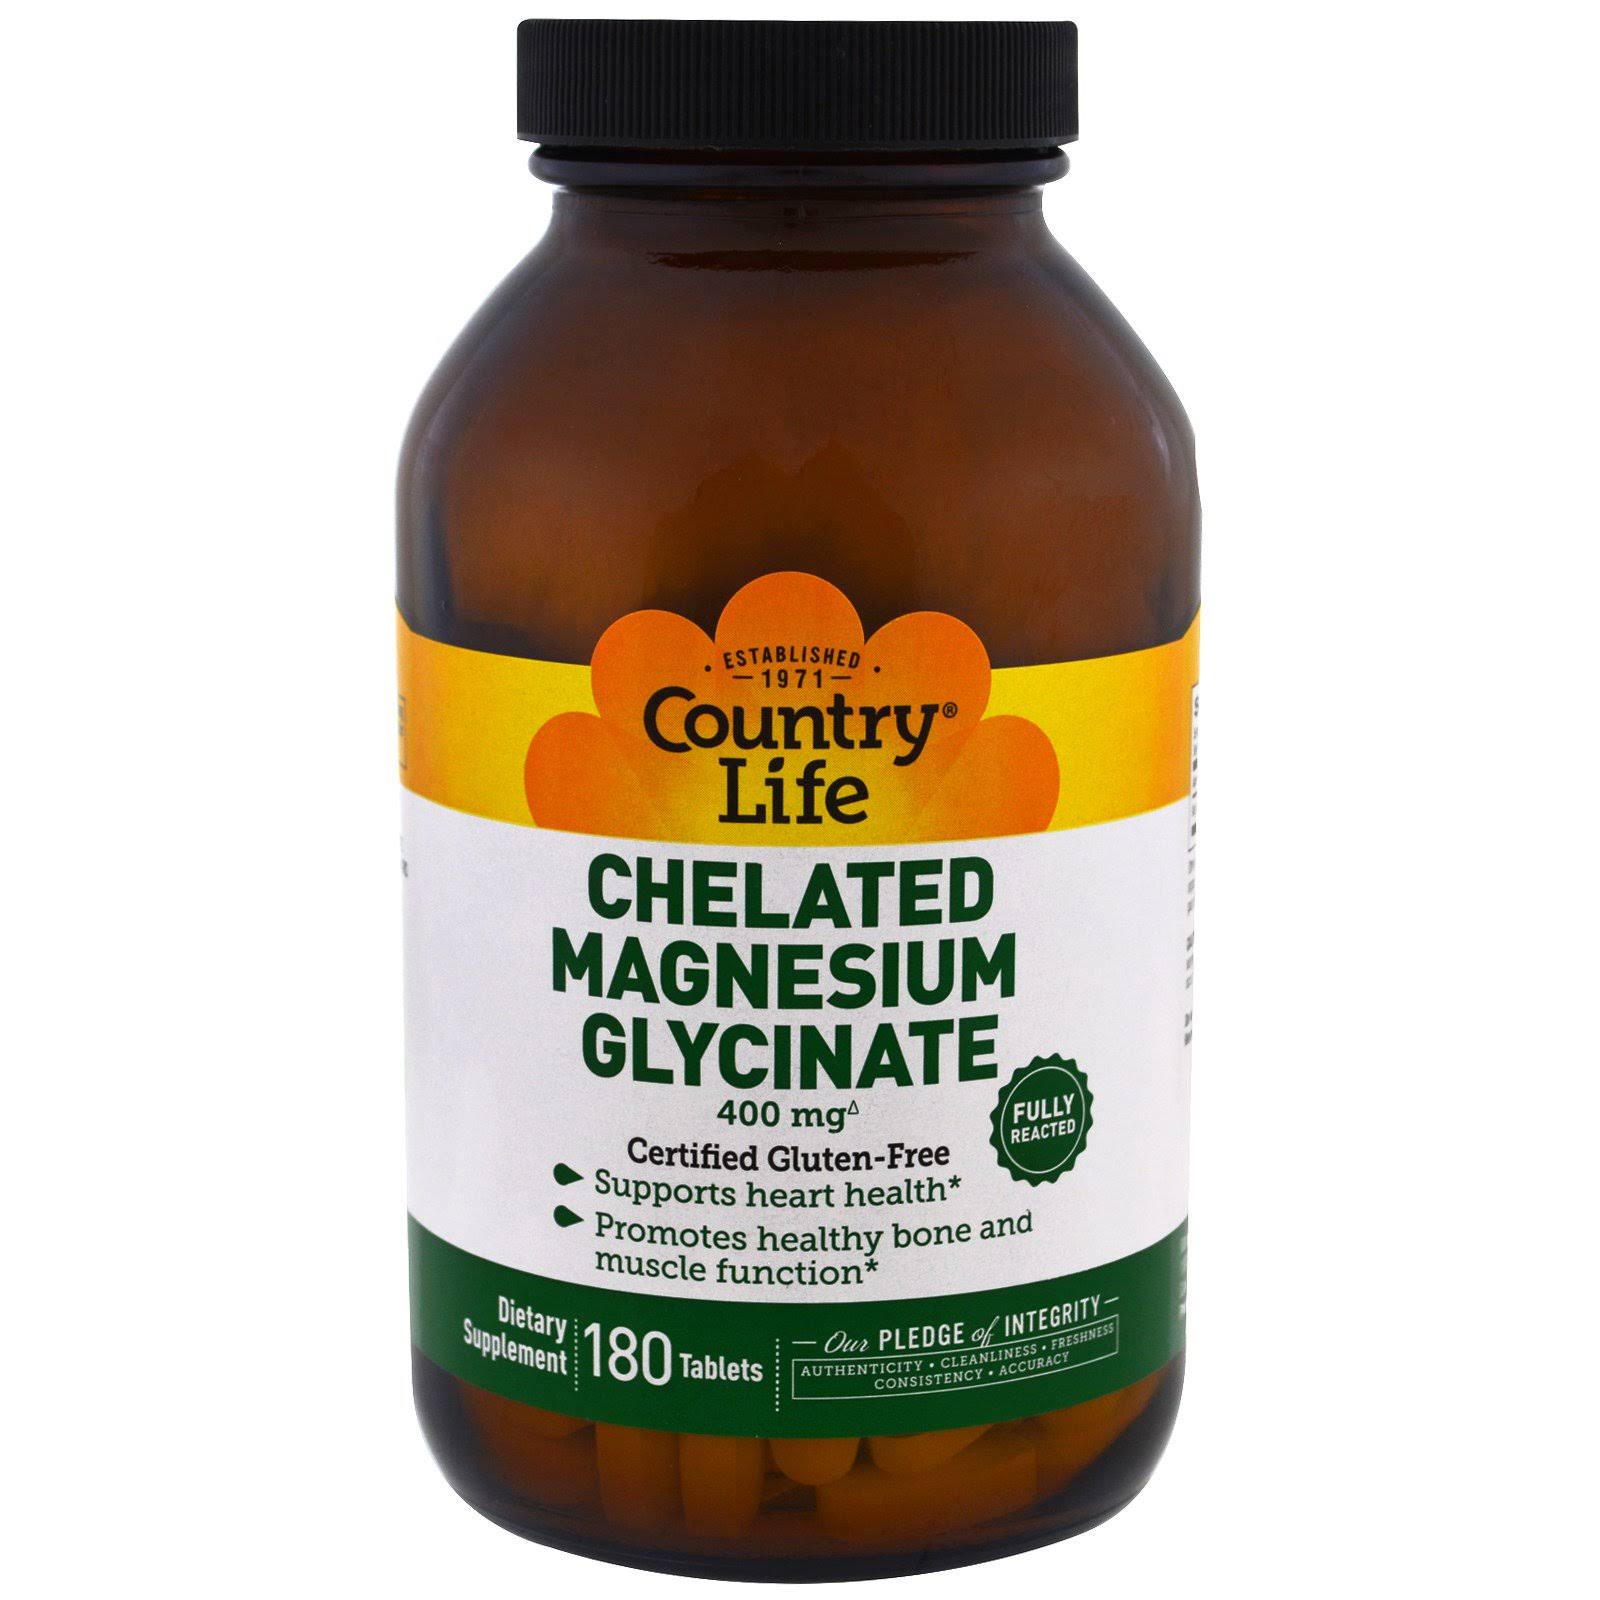 Country Life Chelated Magnesium Glycinate Dietary Supplement - 180 Tablets